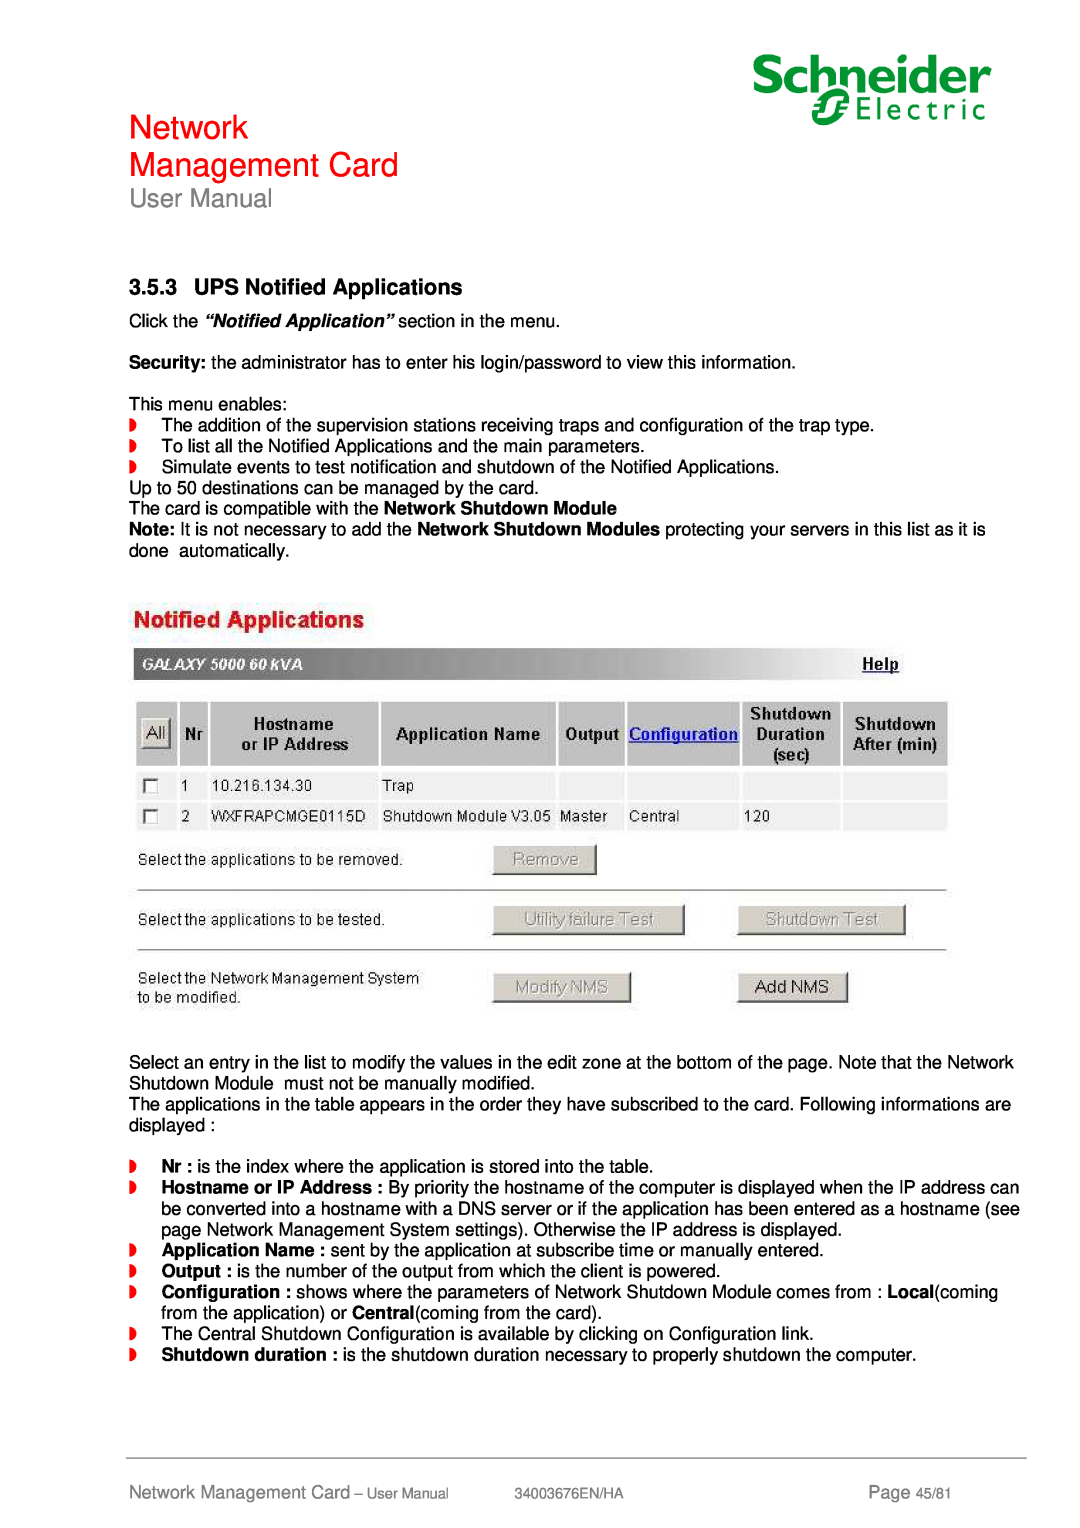 Schneider Electric 66074, 66846 user manual UPS Notified Applications, Network Management Card, User Manual, Page 45/81 